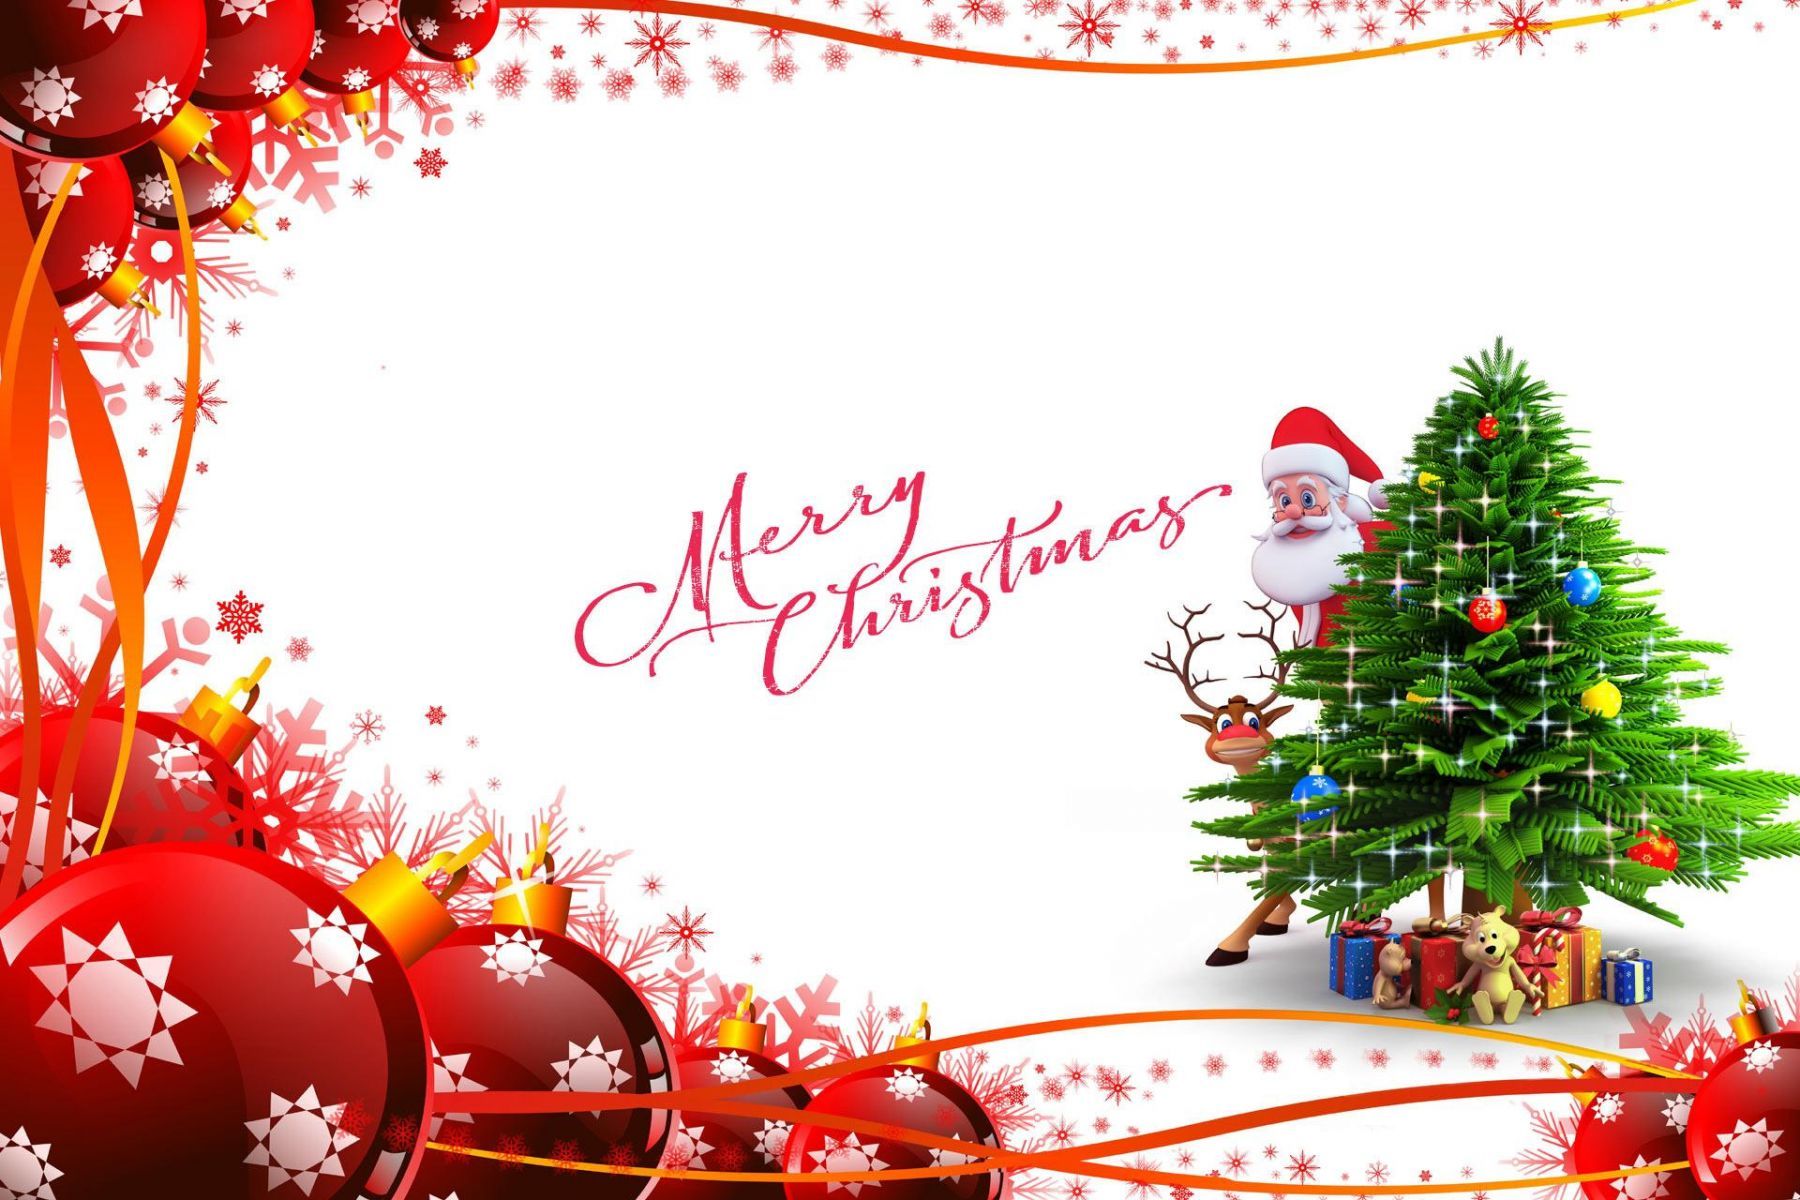 Merry Christmas Quotes Wallpaper. HD Christmas Wallpaper for Mobile and Desktop